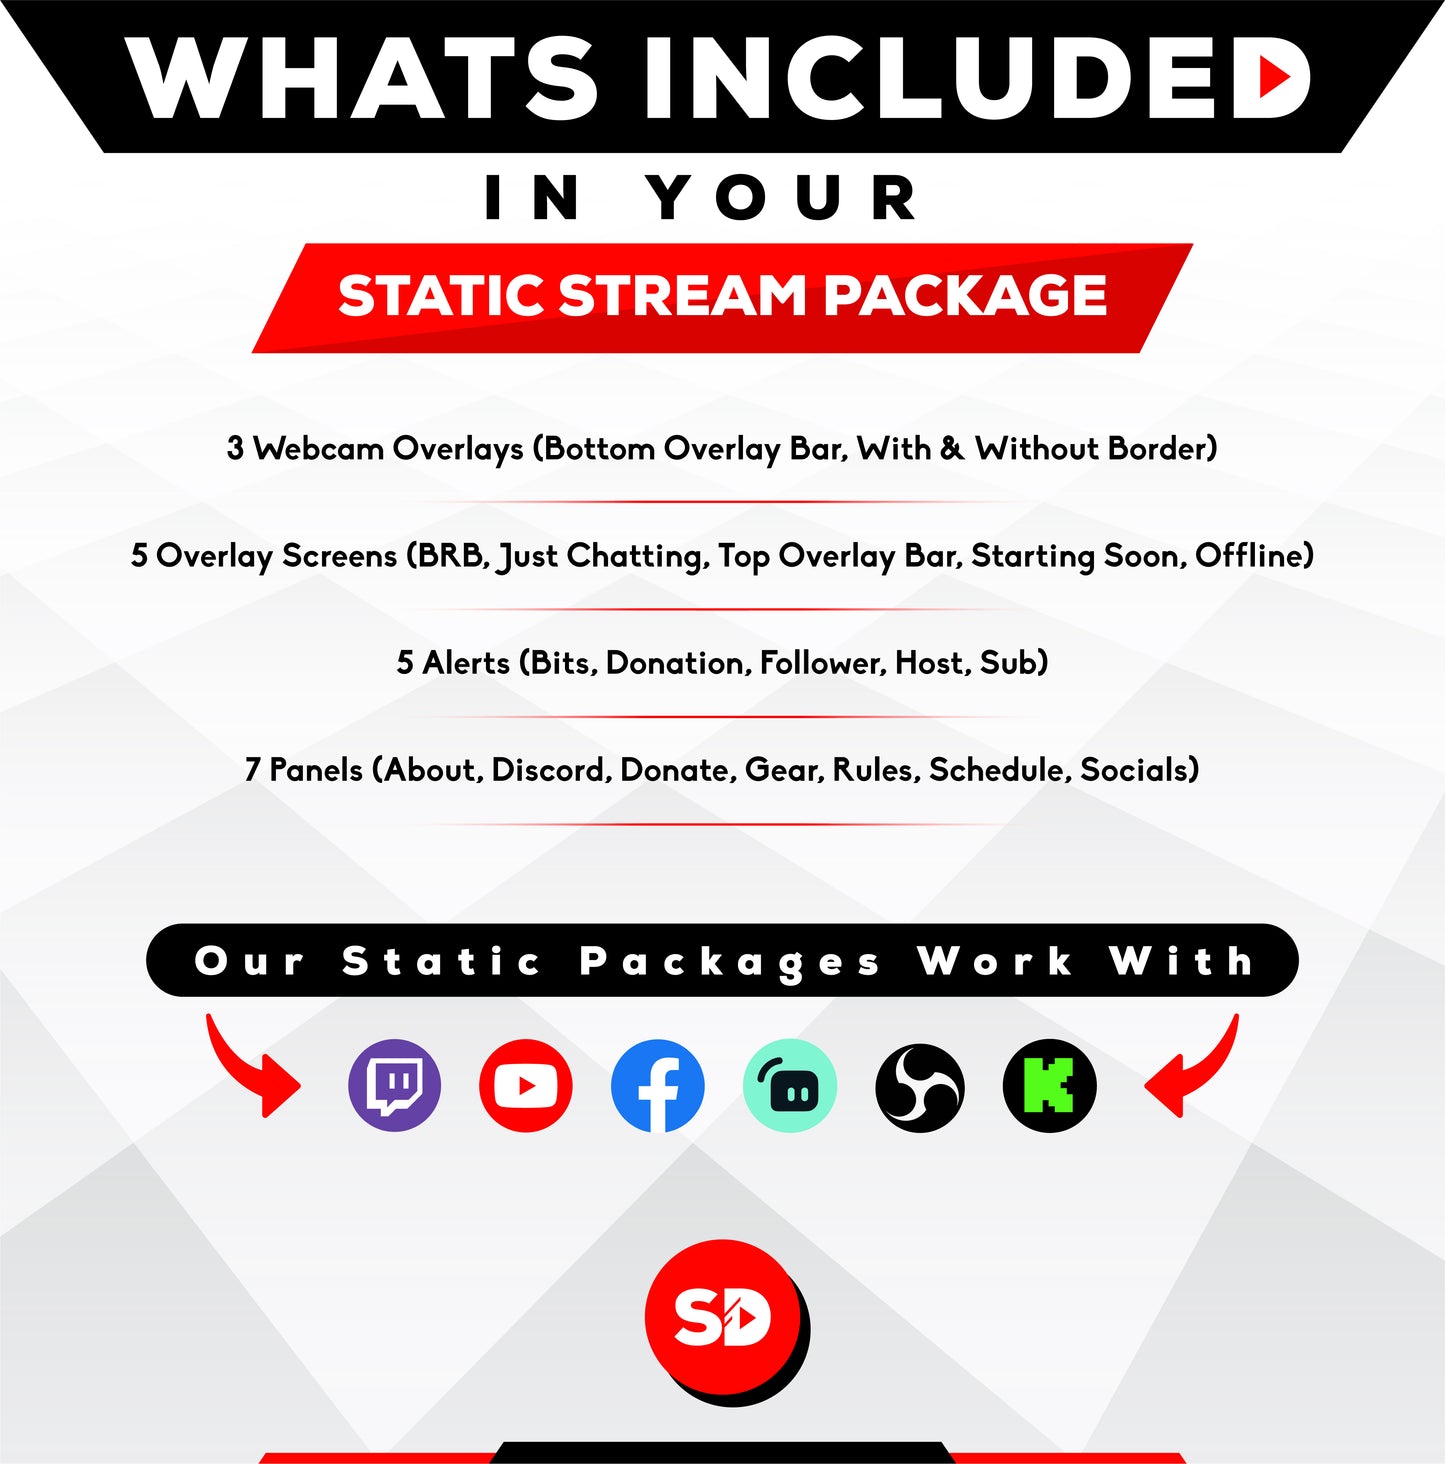 whats included in your package - static stream overlay package - strange - stream designz